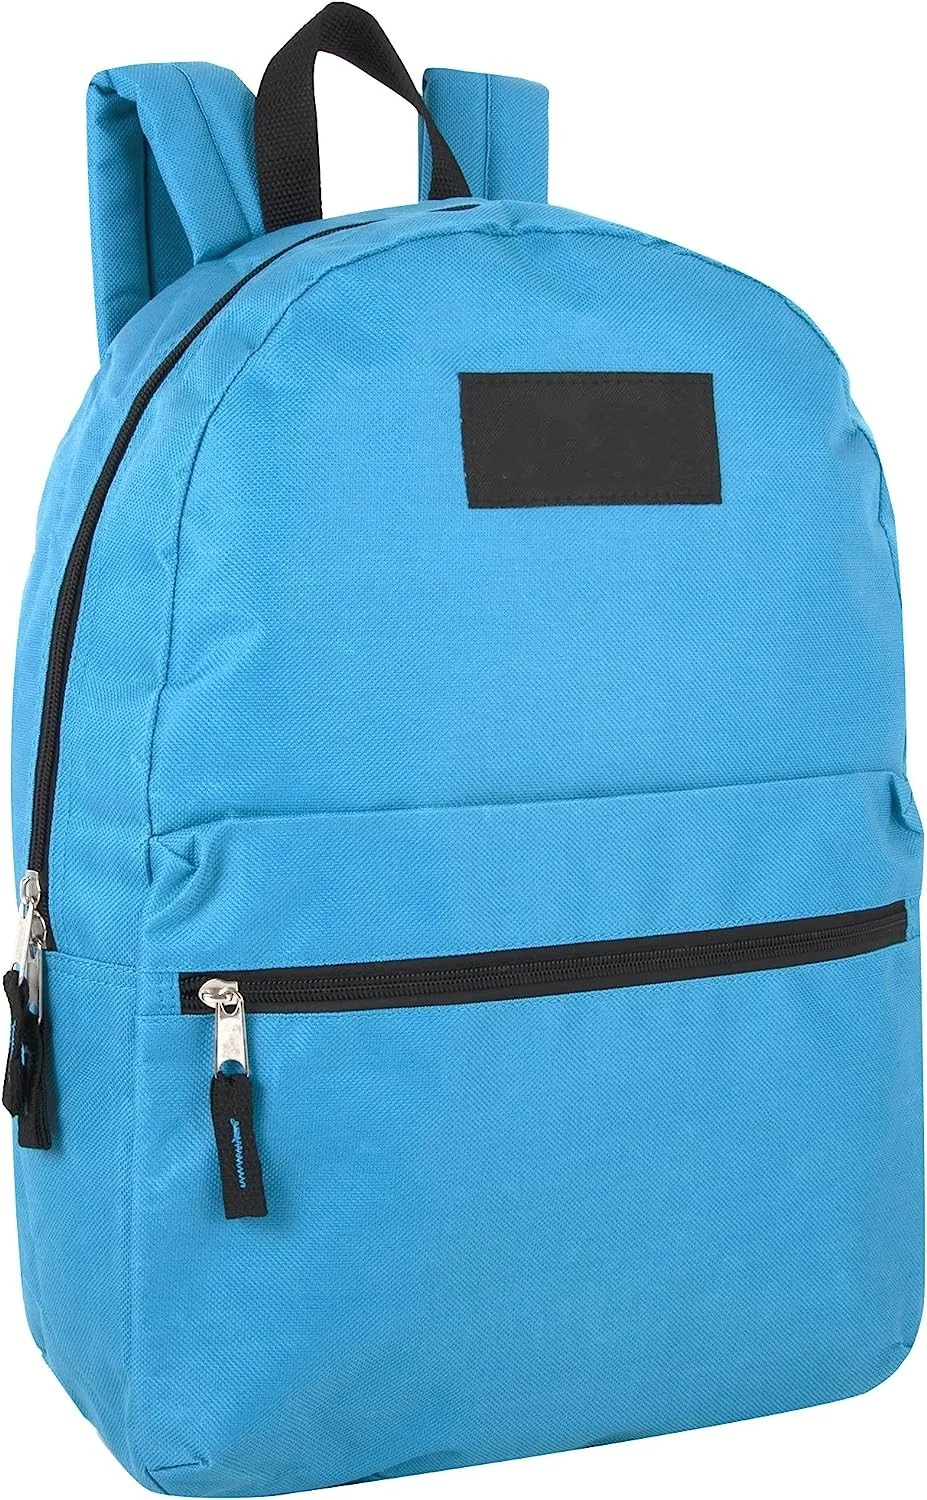 Classic 17 Inch Backpacks in Bulk Wholesale for Boys and Girls